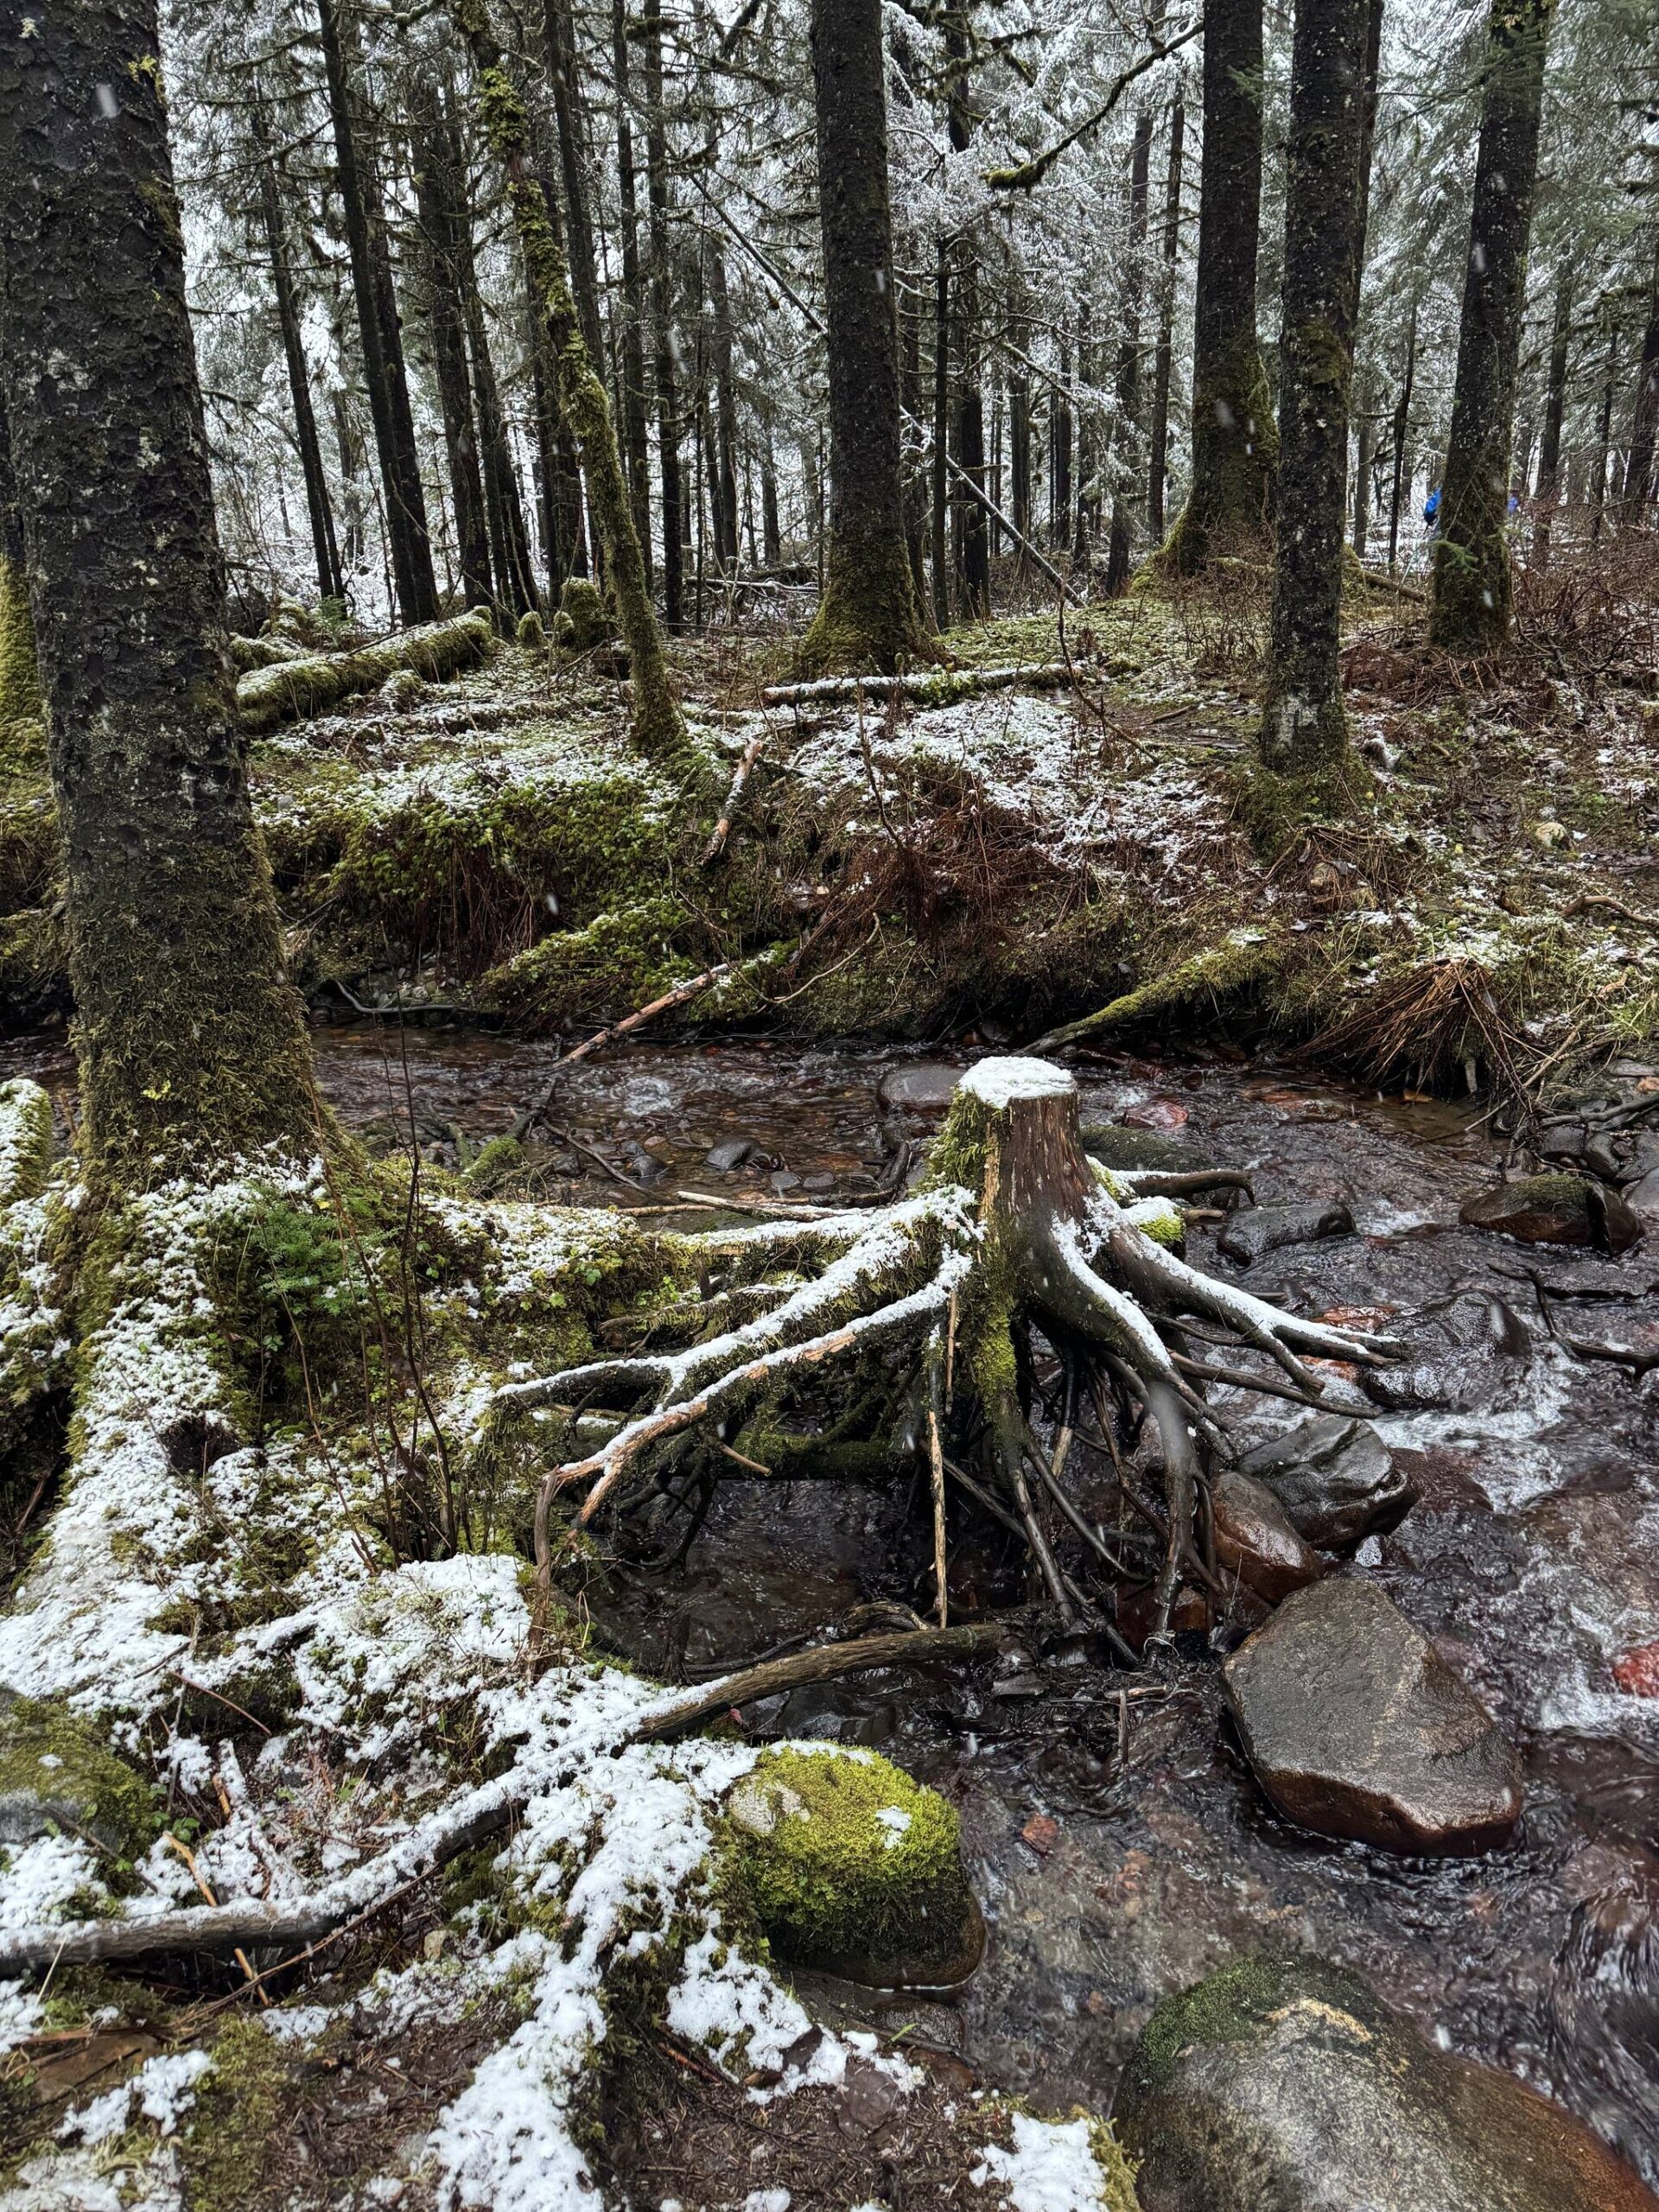 An exposed snow-covered tree stump on the Lemon Creek Trail on Dec. 10. (Photo by Deana Barajas)